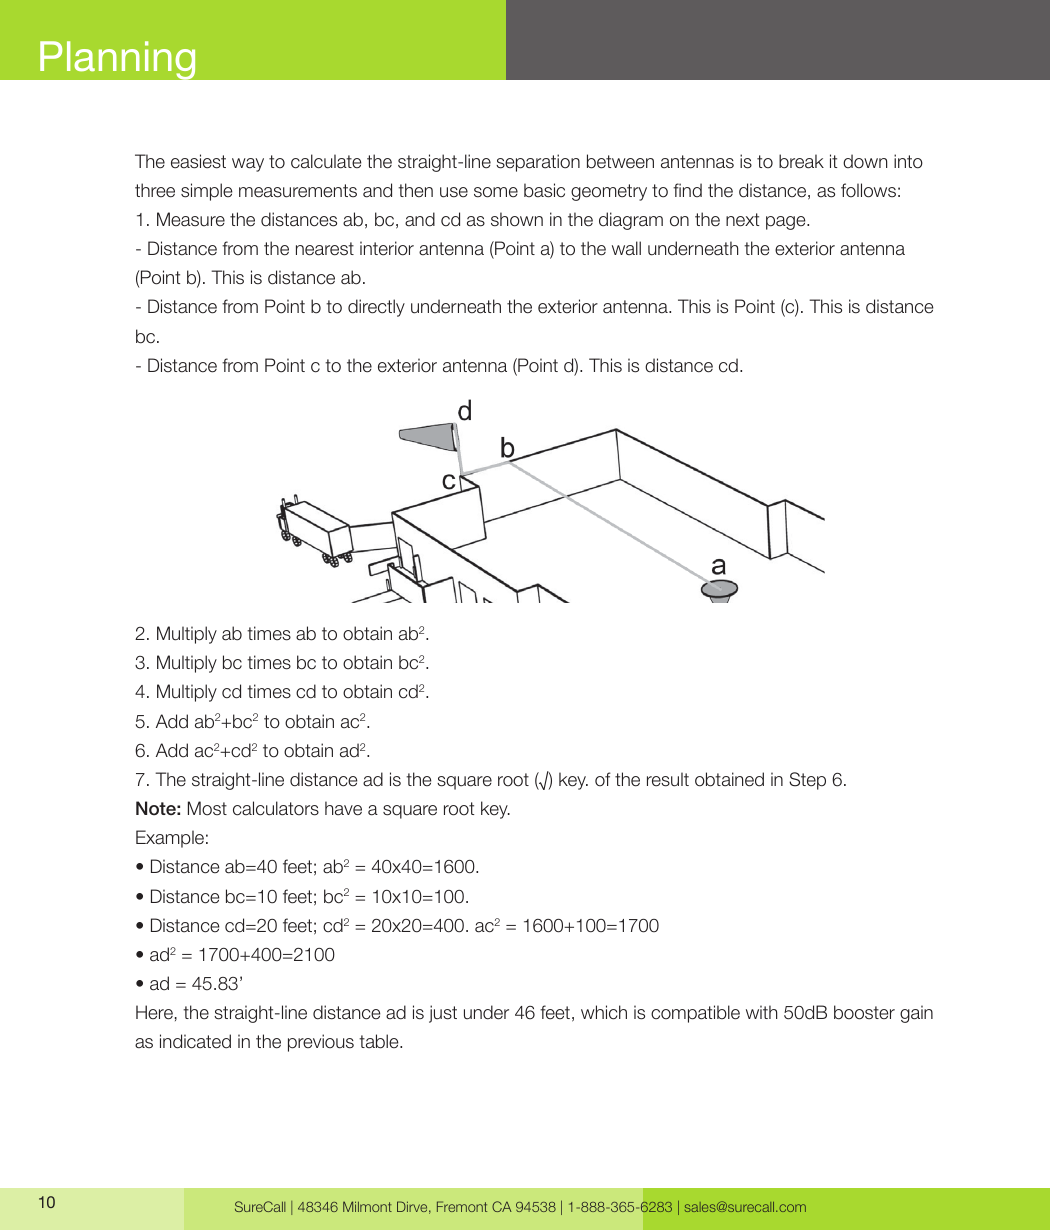 SureCall | 48346 Milmont Dirve, Fremont CA 94538 | 1-888-365-6283 | sales@surecall.com10PlanningThe easiest way to calculate the straight-line separation between antennas is to break it down into three simple measurements and then use some basic geometry to nd the distance, as follows:1. Measure the distances ab, bc, and cd as shown in the diagram on the next page.- Distance from the nearest interior antenna (Point a) to the wall underneath the exterior antenna (Point b). This is distance ab.- Distance from Point b to directly underneath the exterior antenna. This is Point (c). This is distance bc. - Distance from Point c to the exterior antenna (Point d). This is distance cd.2. Multiply ab times ab to obtain ab2.3. Multiply bc times bc to obtain bc2.4. Multiply cd times cd to obtain cd2.5. Add ab2+bc2 to obtain ac2.6. Add ac2+cd2 to obtain ad2.7. The straight-line distance ad is the square root (√) key. of the result obtained in Step 6. Note: Most calculators have a square root key.Example:• Distance ab=40 feet; ab2 = 40x40=1600. • Distance bc=10 feet; bc2 = 10x10=100.• Distance cd=20 feet; cd2 = 20x20=400. ac2 = 1600+100=1700• ad2 = 1700+400=2100• ad = 45.83’Here, the straight-line distance ad is just under 46 feet, which is compatible with 50dB booster gain as indicated in the previous table.